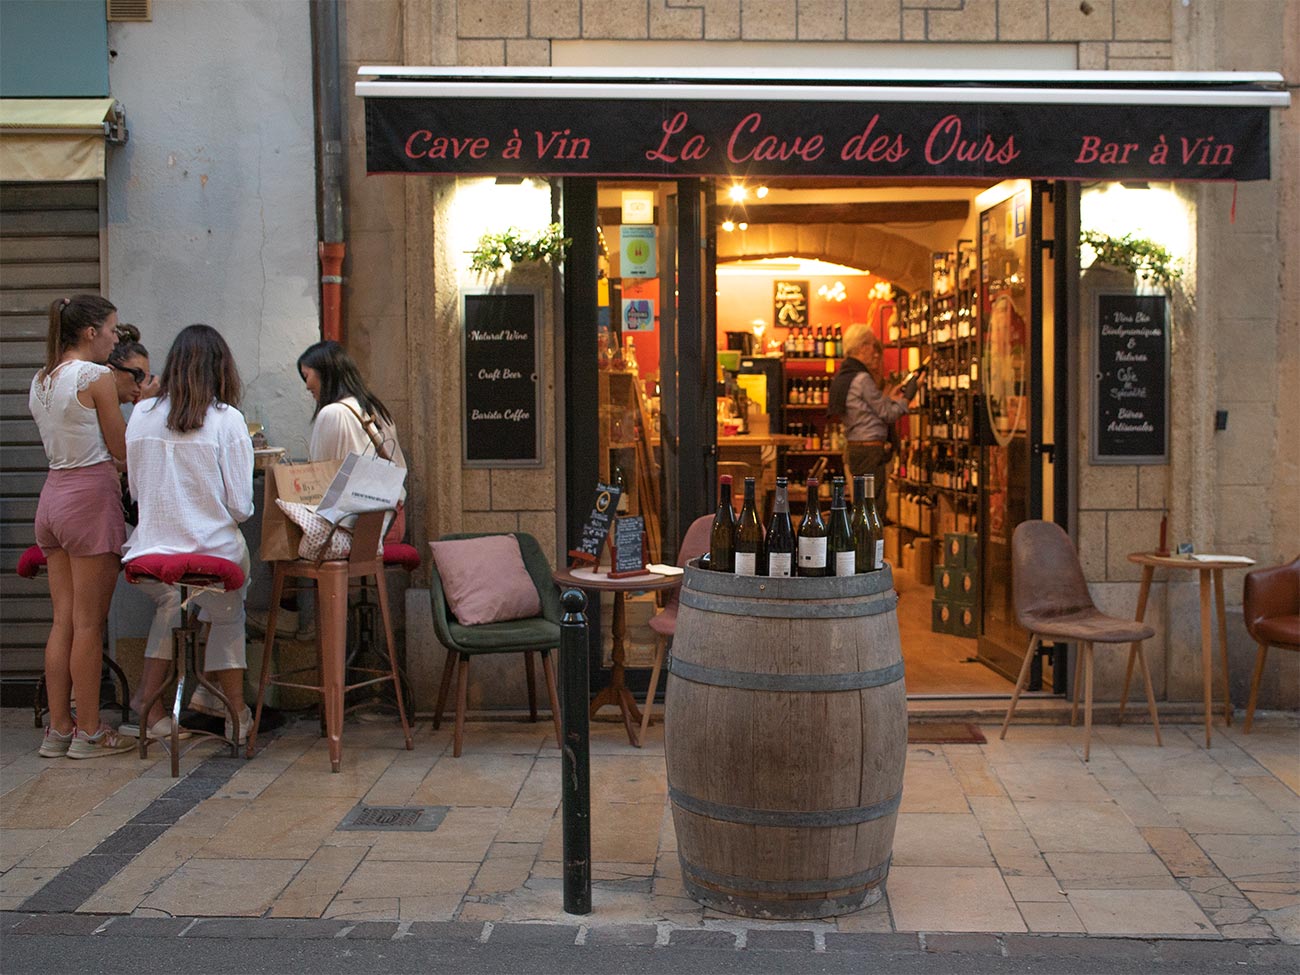 La Cave de Ours - Bar and cellar with living wines in Aix-en-Provence - City Guide Love Spots (facade)